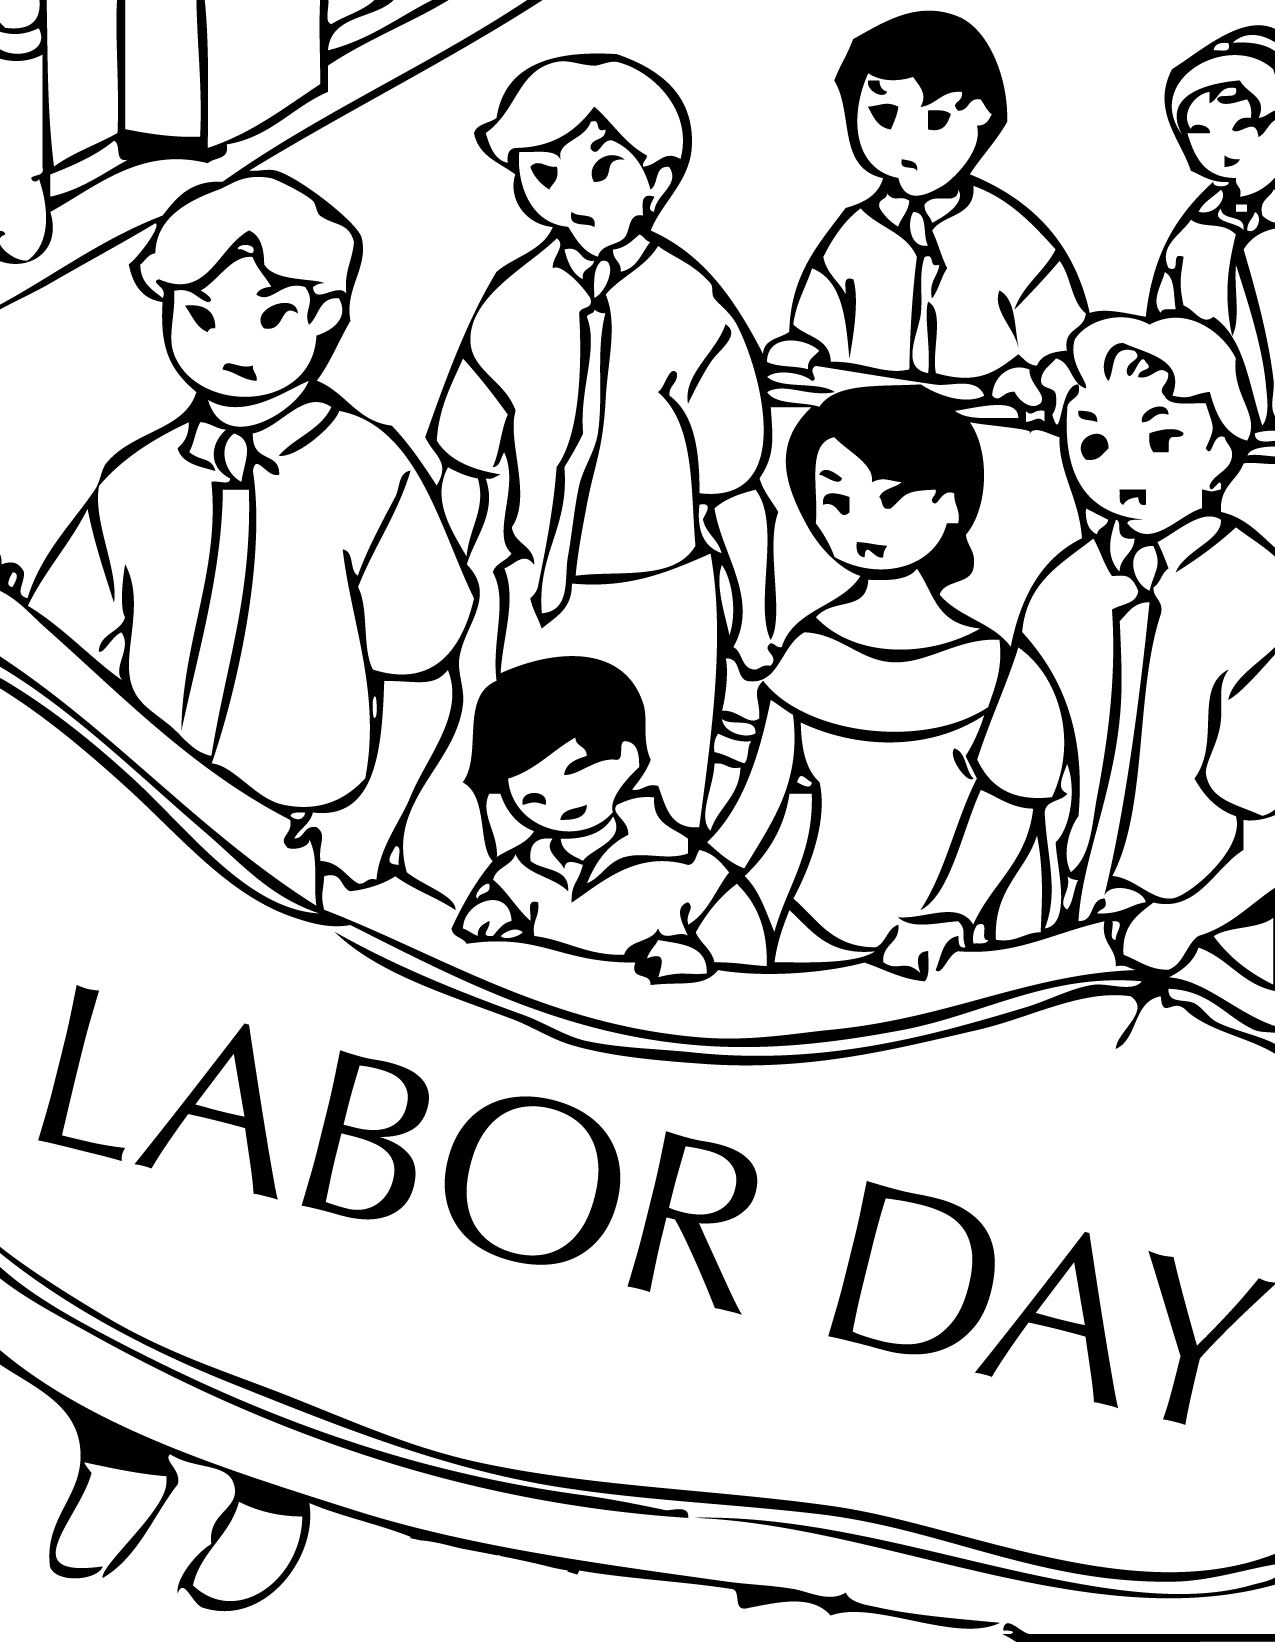 Labor Day Coloring Pages - Best Coloring Pages For Kids